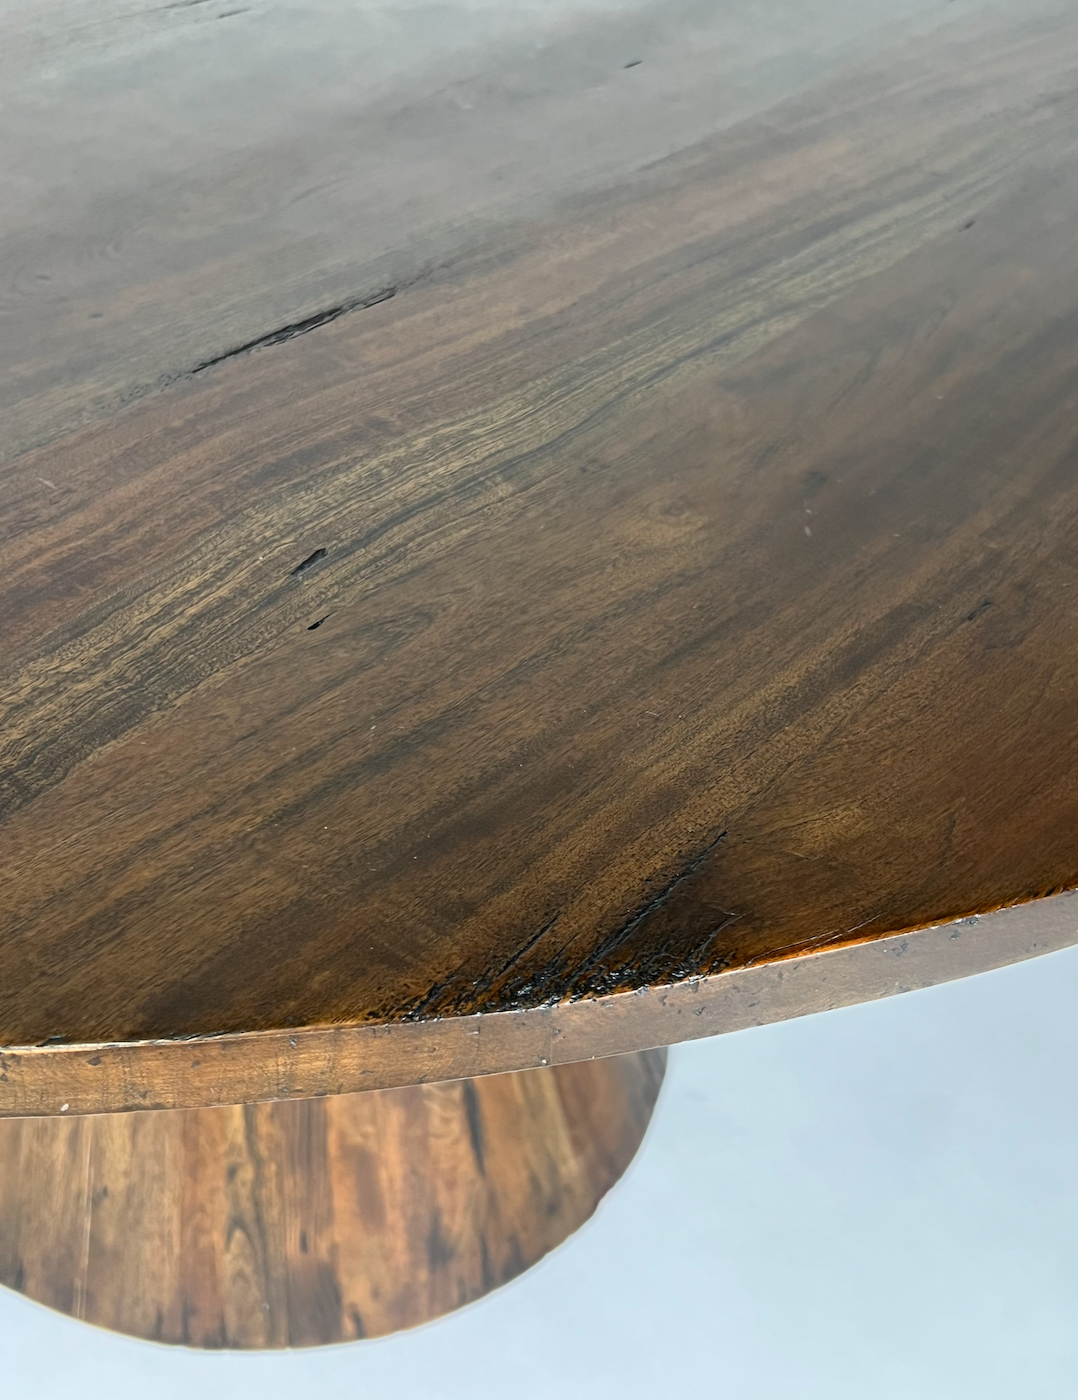 Round wood pedestal dining table